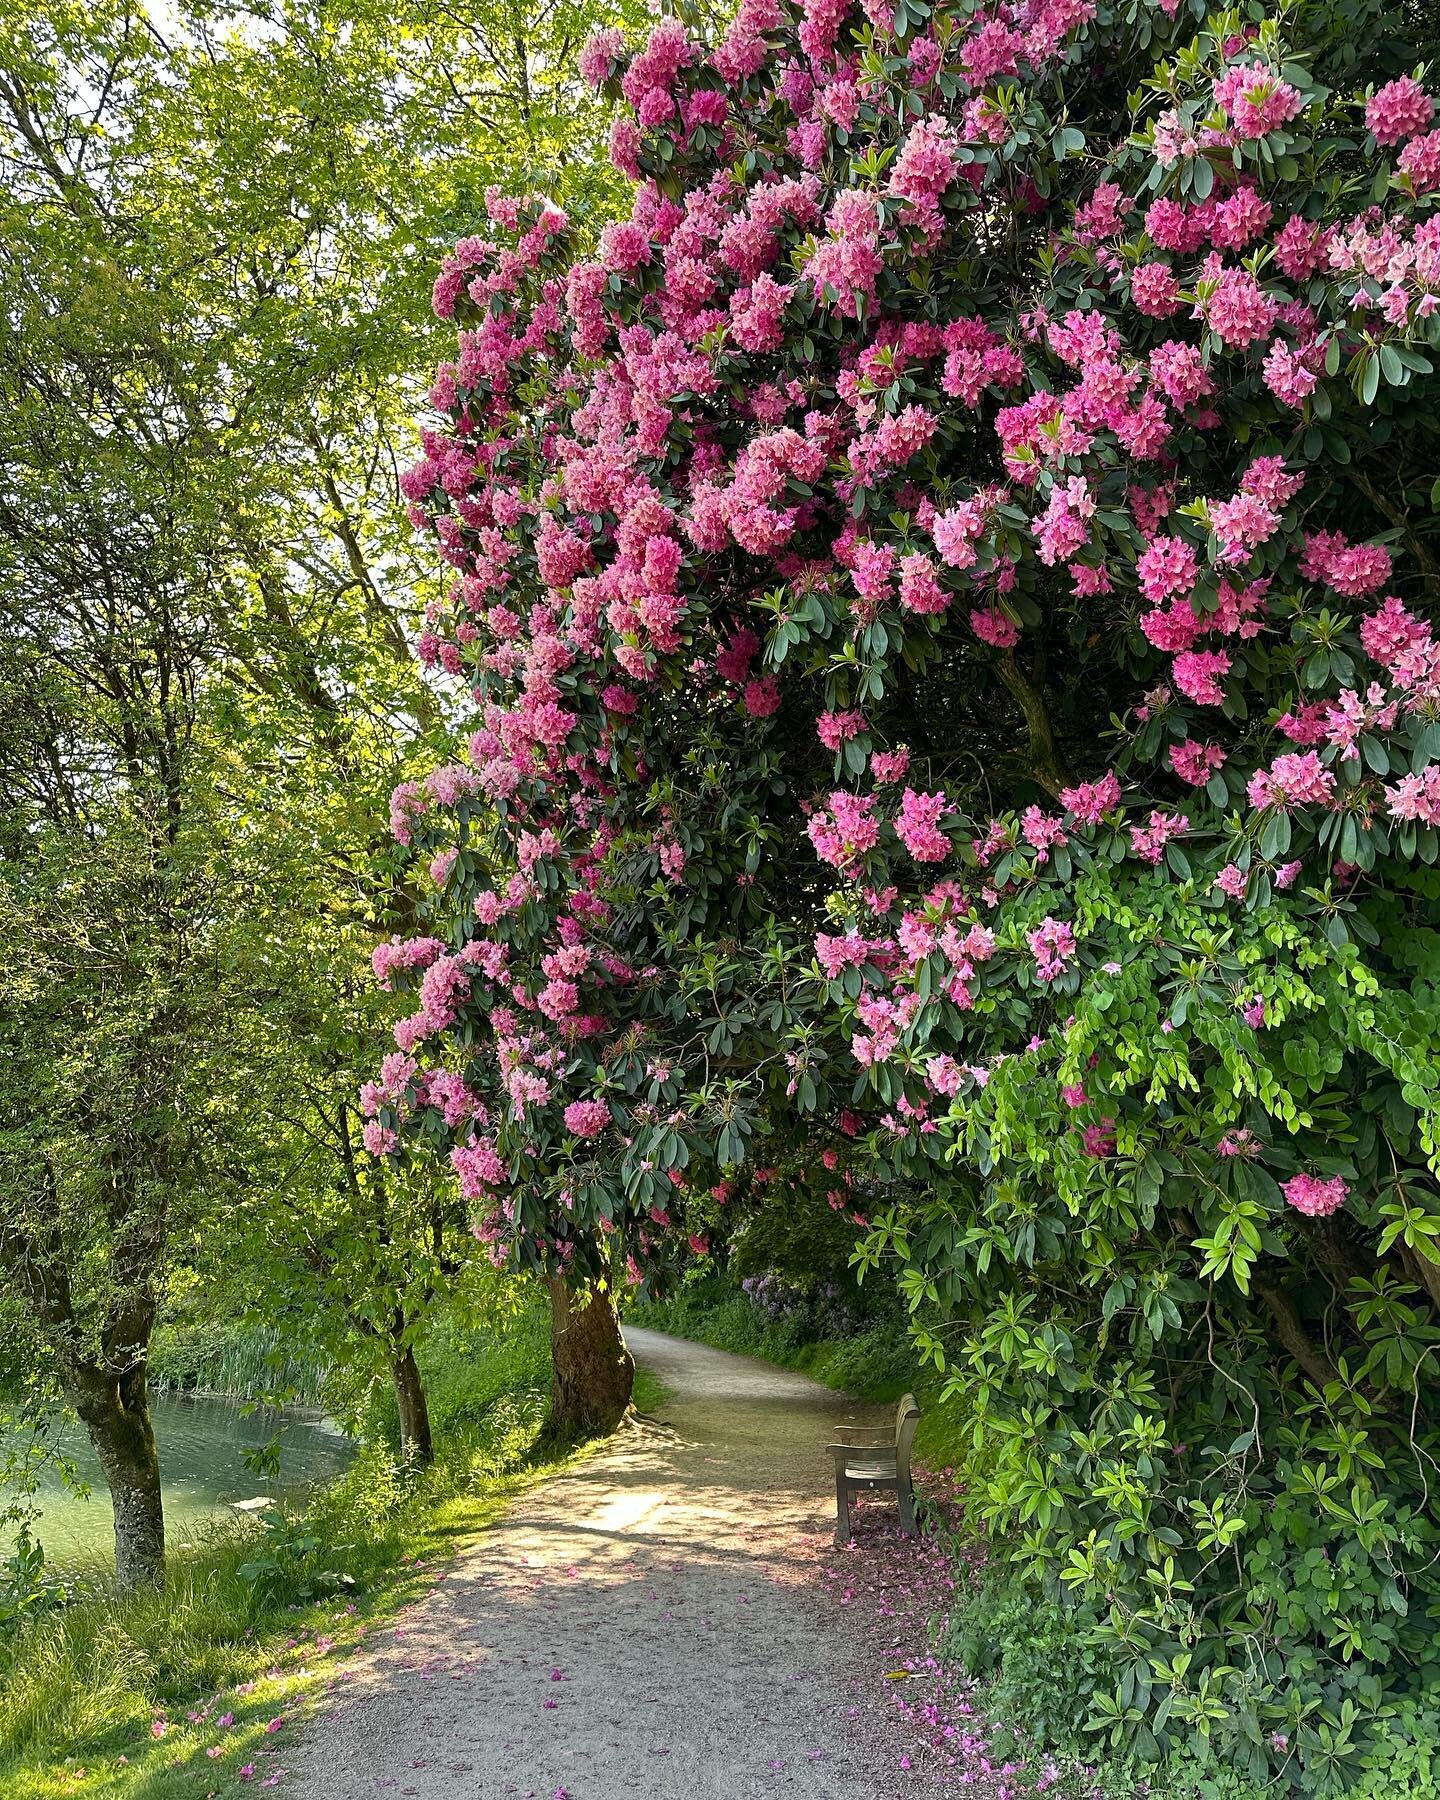 Rainy day today and writing about the beauty of rhododendrons and azaleas (and how to tell the difference between the two). Got me thinking about an incredible trip to @ntstourhead this June when we stumbled upon an amazing display of rhododendrons a